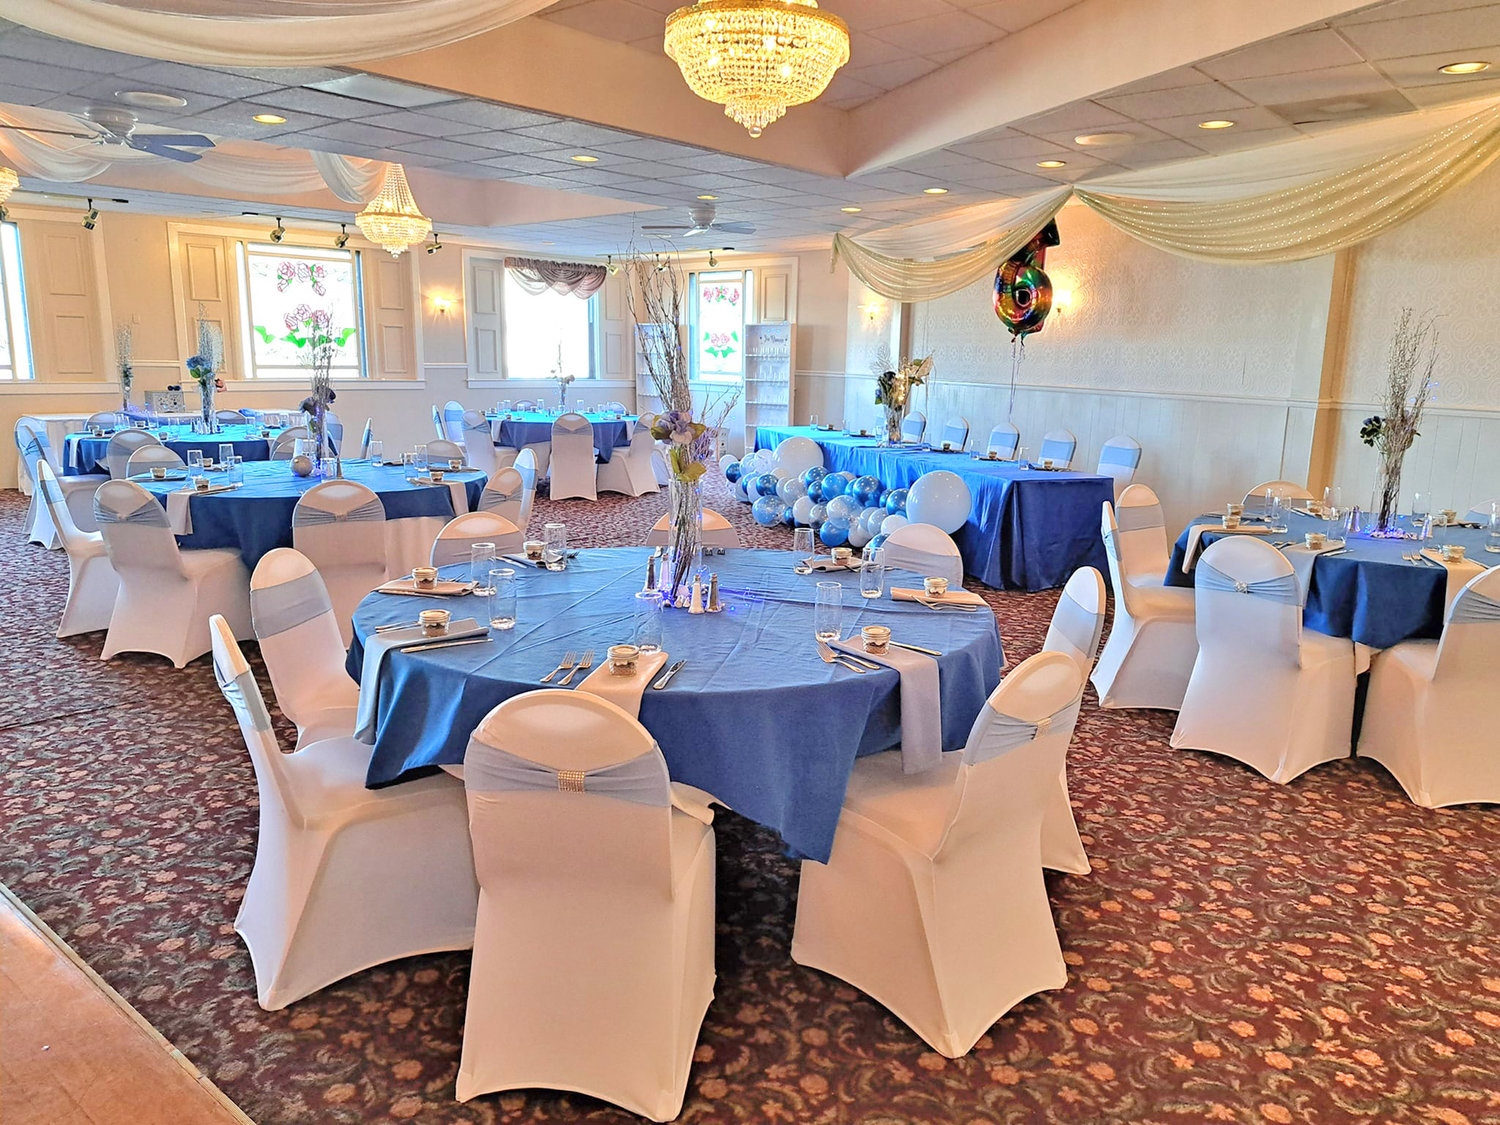 The Monarch can host events for 40 to 220 people, including business and corporate events as well as wedding receptions, proms, graduations, and showers.